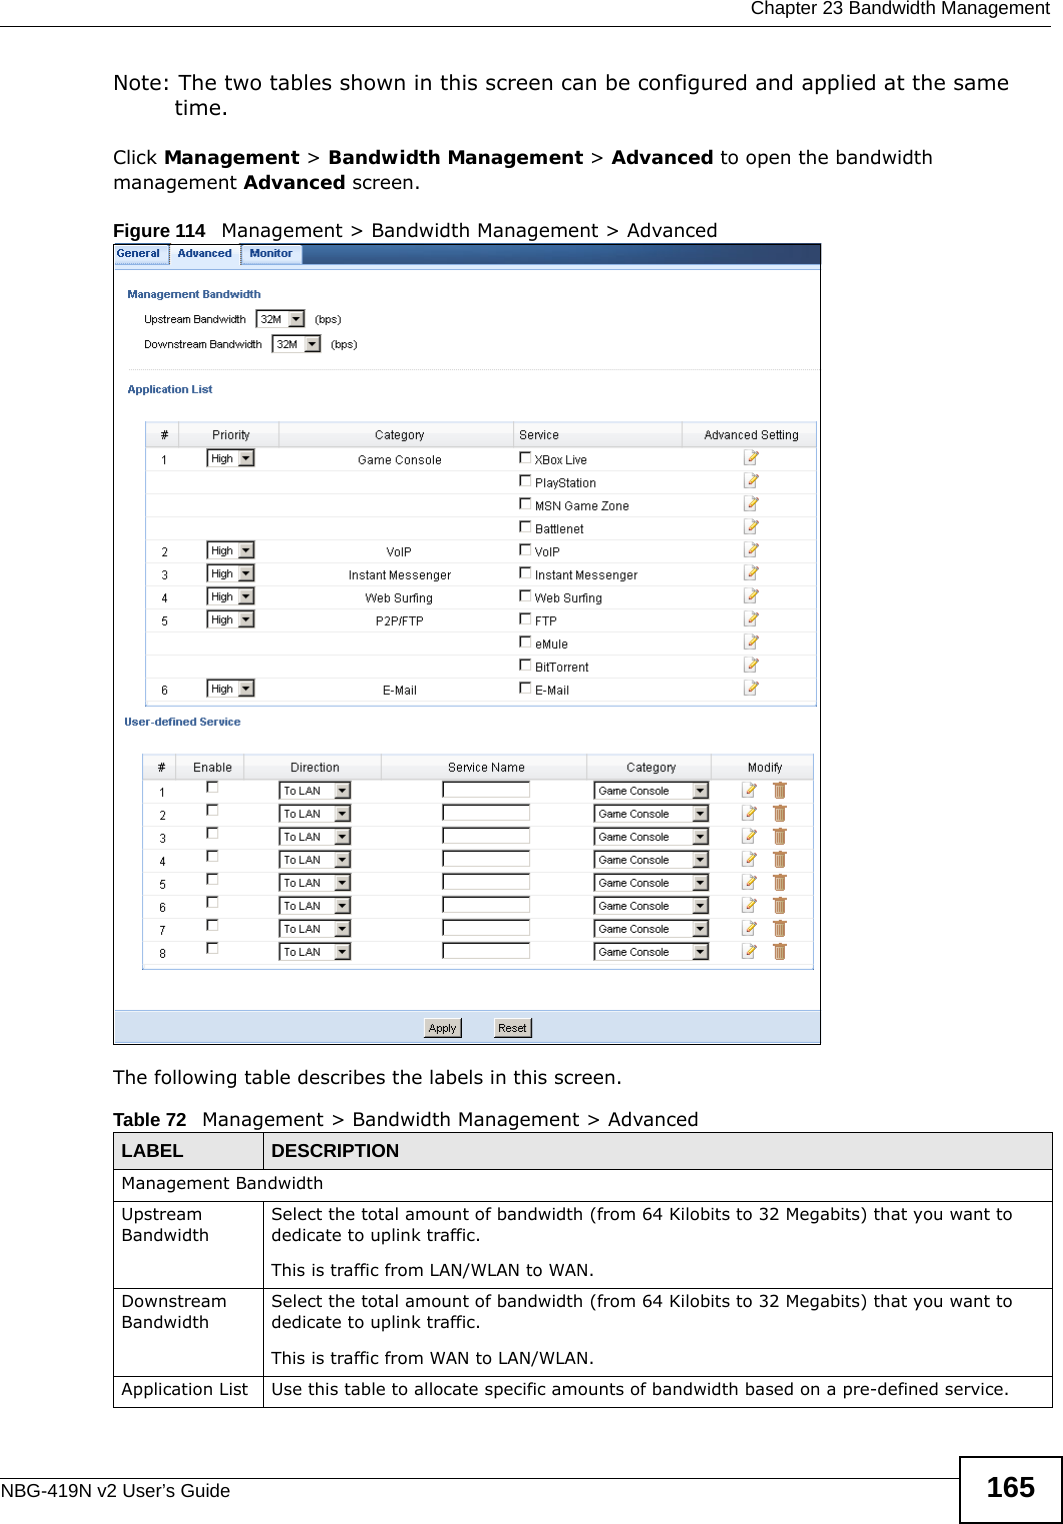  Chapter 23 Bandwidth ManagementNBG-419N v2 User’s Guide 165Note: The two tables shown in this screen can be configured and applied at the same time. Click Management &gt; Bandwidth Management &gt; Advanced to open the bandwidth management Advanced screen.Figure 114   Management &gt; Bandwidth Management &gt; Advanced The following table describes the labels in this screen.Table 72   Management &gt; Bandwidth Management &gt; Advanced LABEL DESCRIPTIONManagement BandwidthUpstream BandwidthSelect the total amount of bandwidth (from 64 Kilobits to 32 Megabits) that you want to dedicate to uplink traffic. This is traffic from LAN/WLAN to WAN.Downstream BandwidthSelect the total amount of bandwidth (from 64 Kilobits to 32 Megabits) that you want to dedicate to uplink traffic. This is traffic from WAN to LAN/WLAN.Application List Use this table to allocate specific amounts of bandwidth based on a pre-defined service.